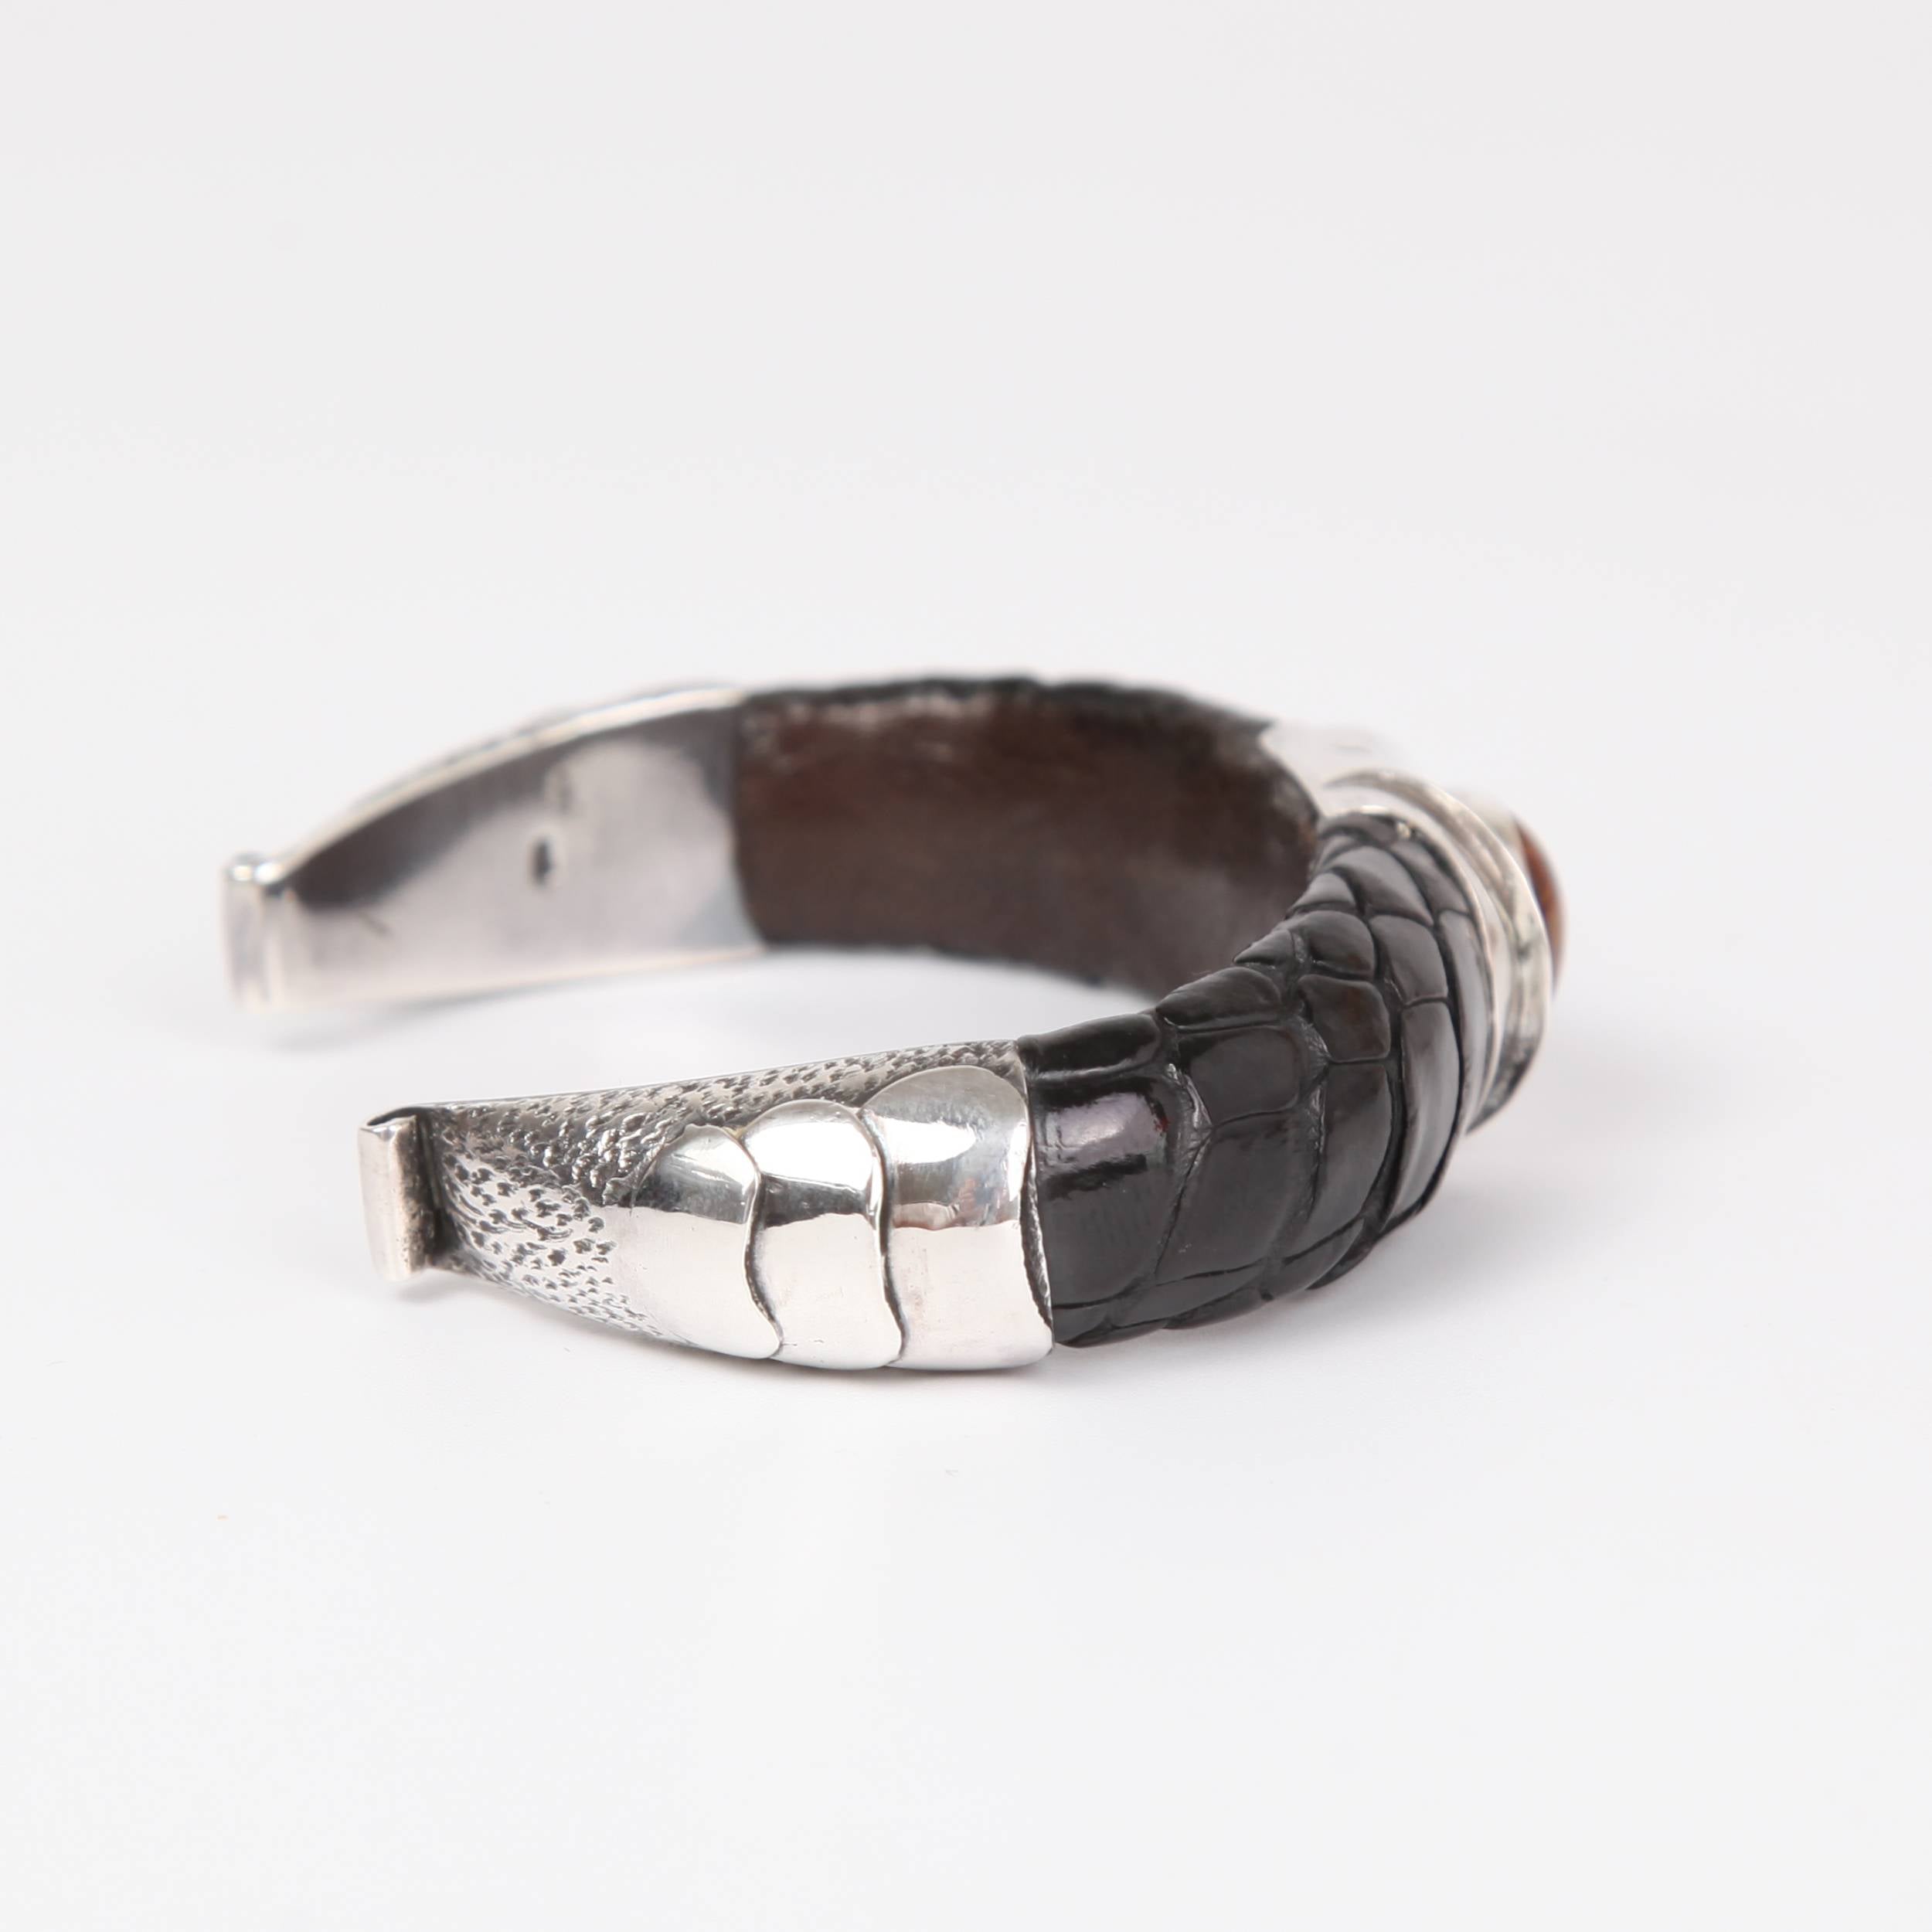 Leather (Ostrich toe skin) Bracelet with Sterling Silver and Pietersite